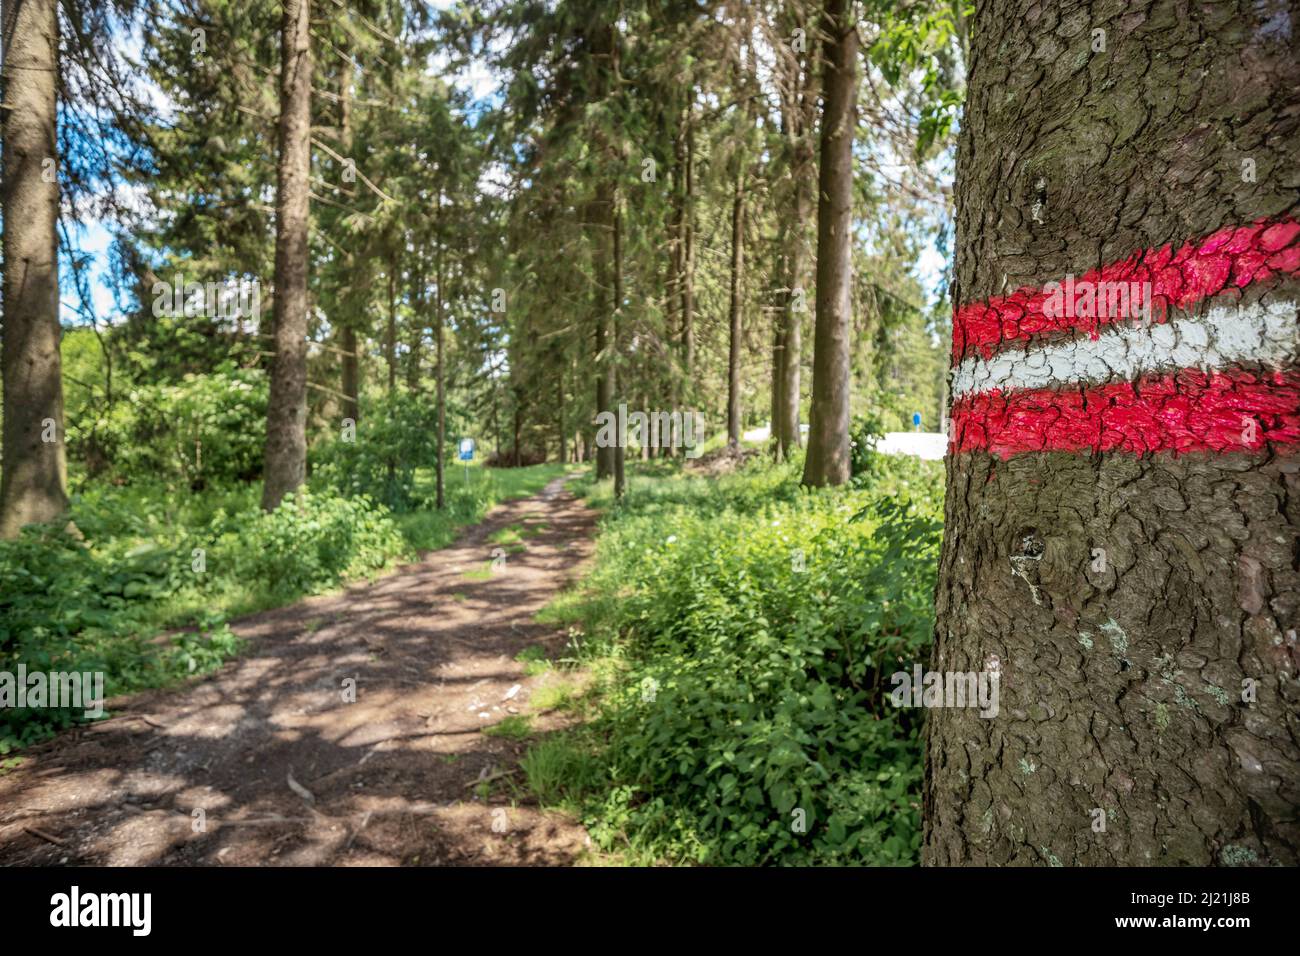 Hiking sign on a tree trunk in forest, Austria Stock Photo